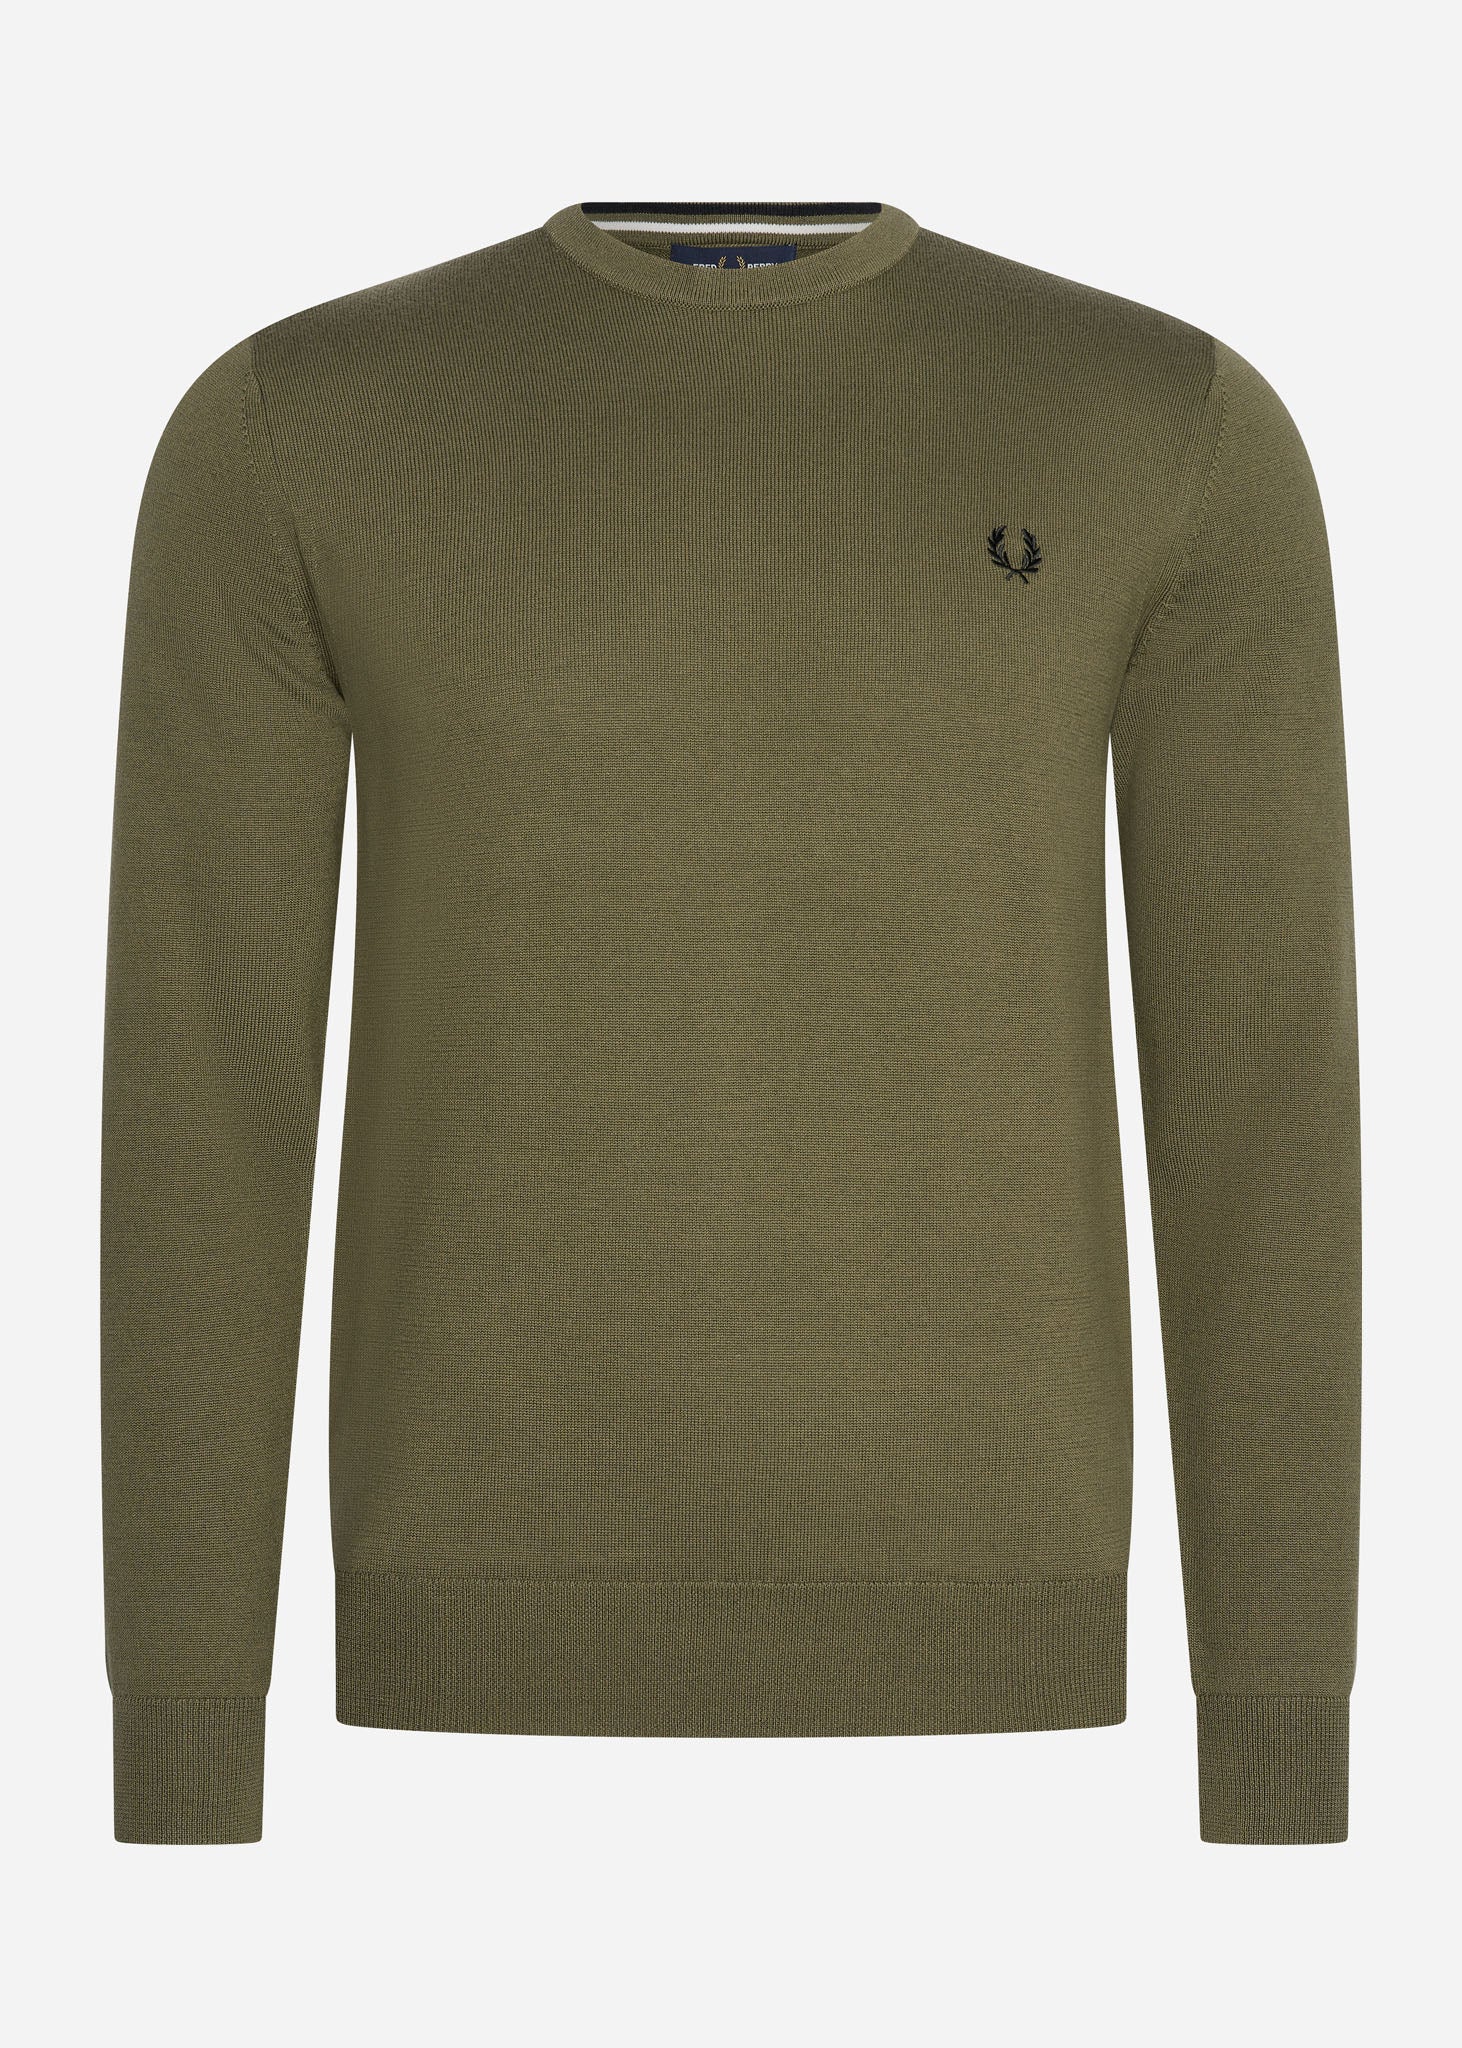 fred perry knit wear classic crew neck jumper green 